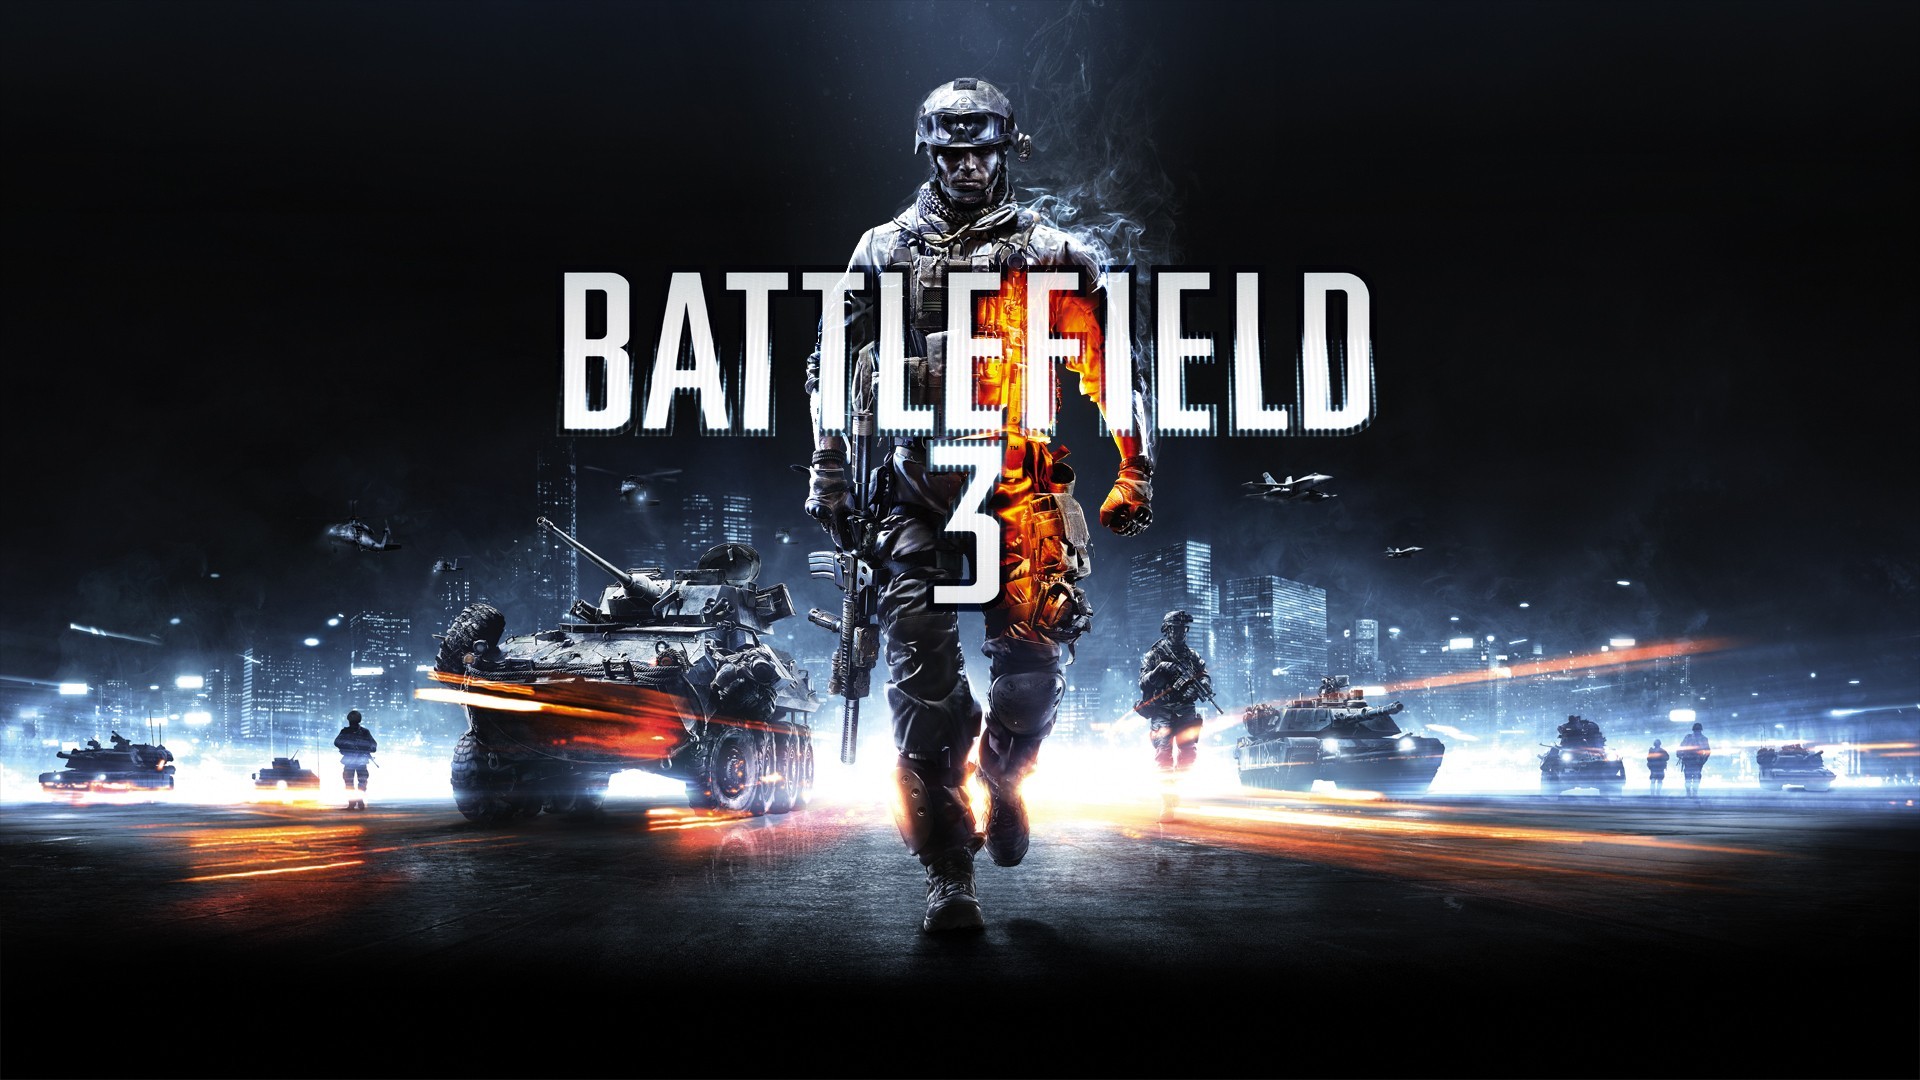 General 1920x1080 Battlefield 3 video games 2011 (Year) soldier PC gaming video game men tank video game art military vehicle